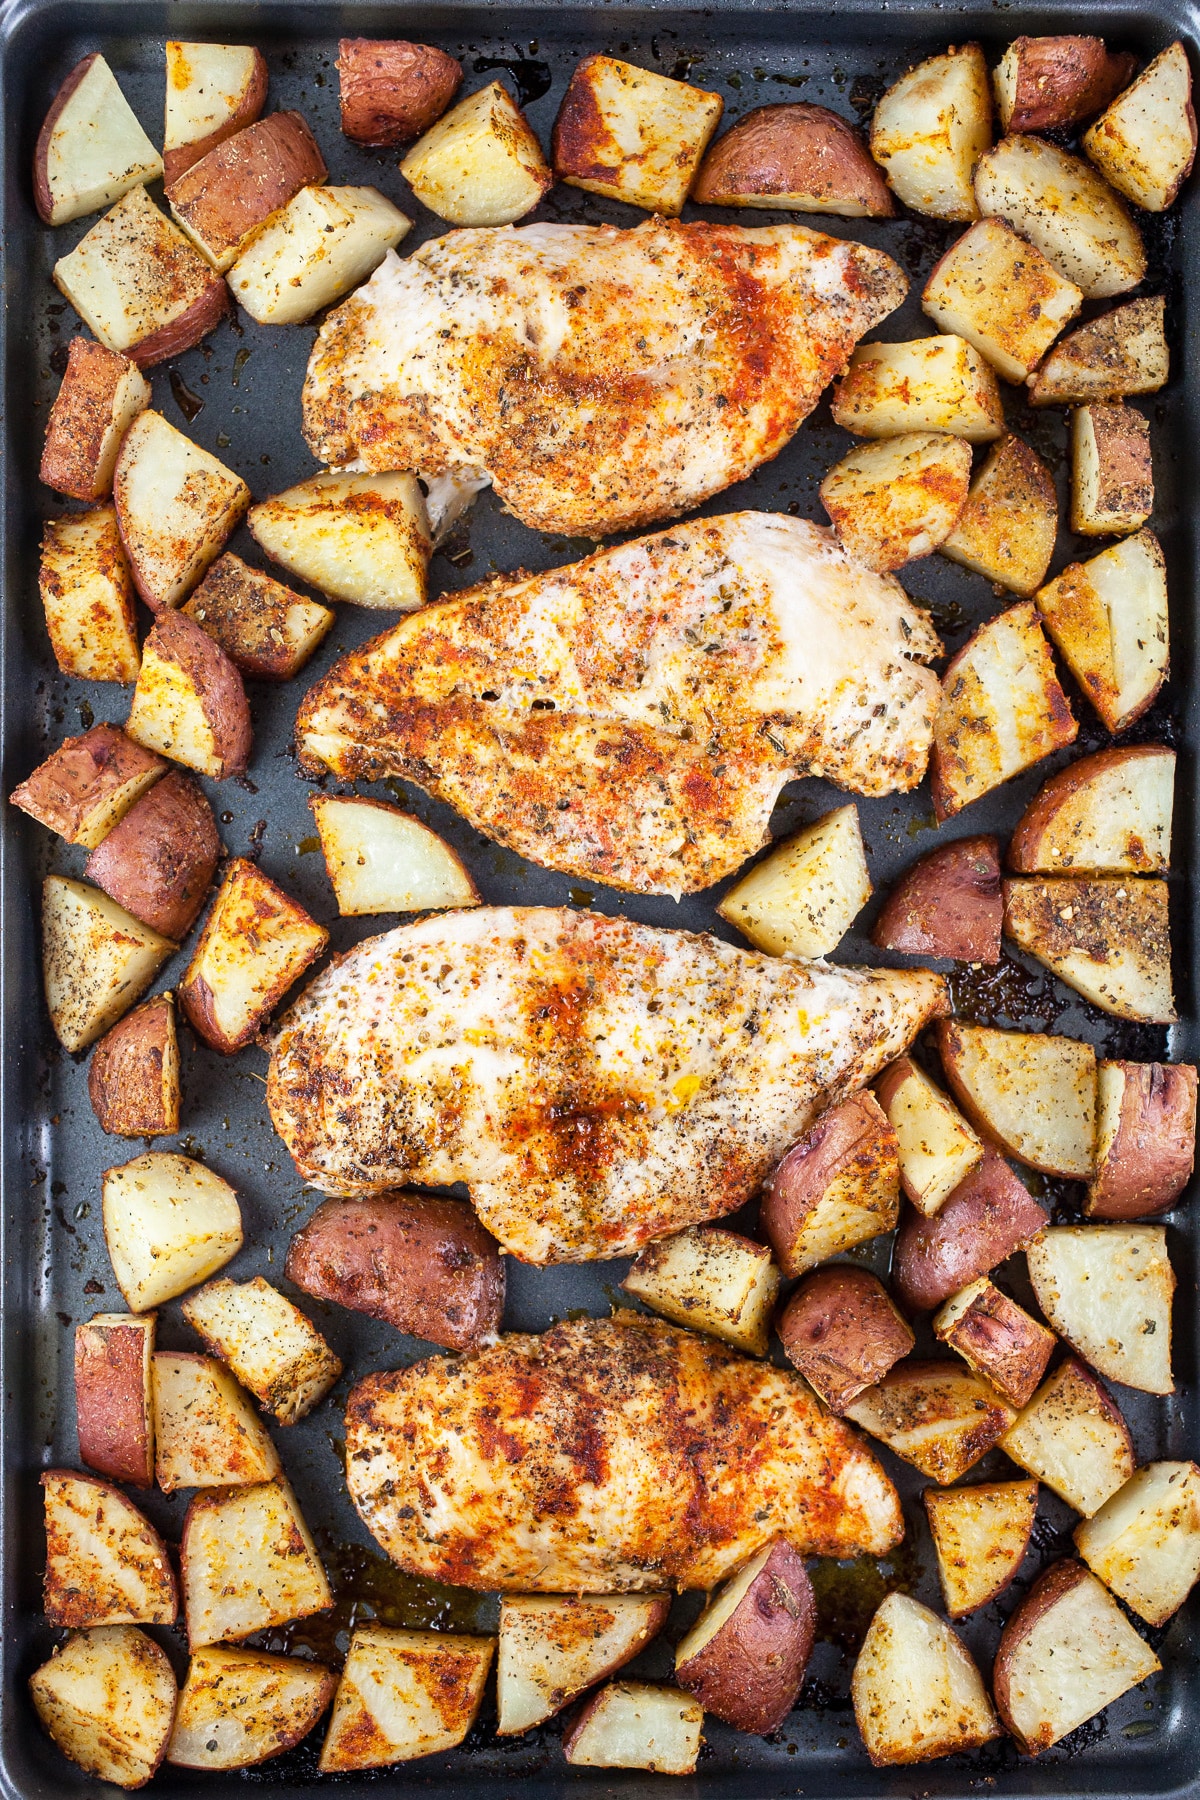 Cooked chicken and potatoes on baking sheet.